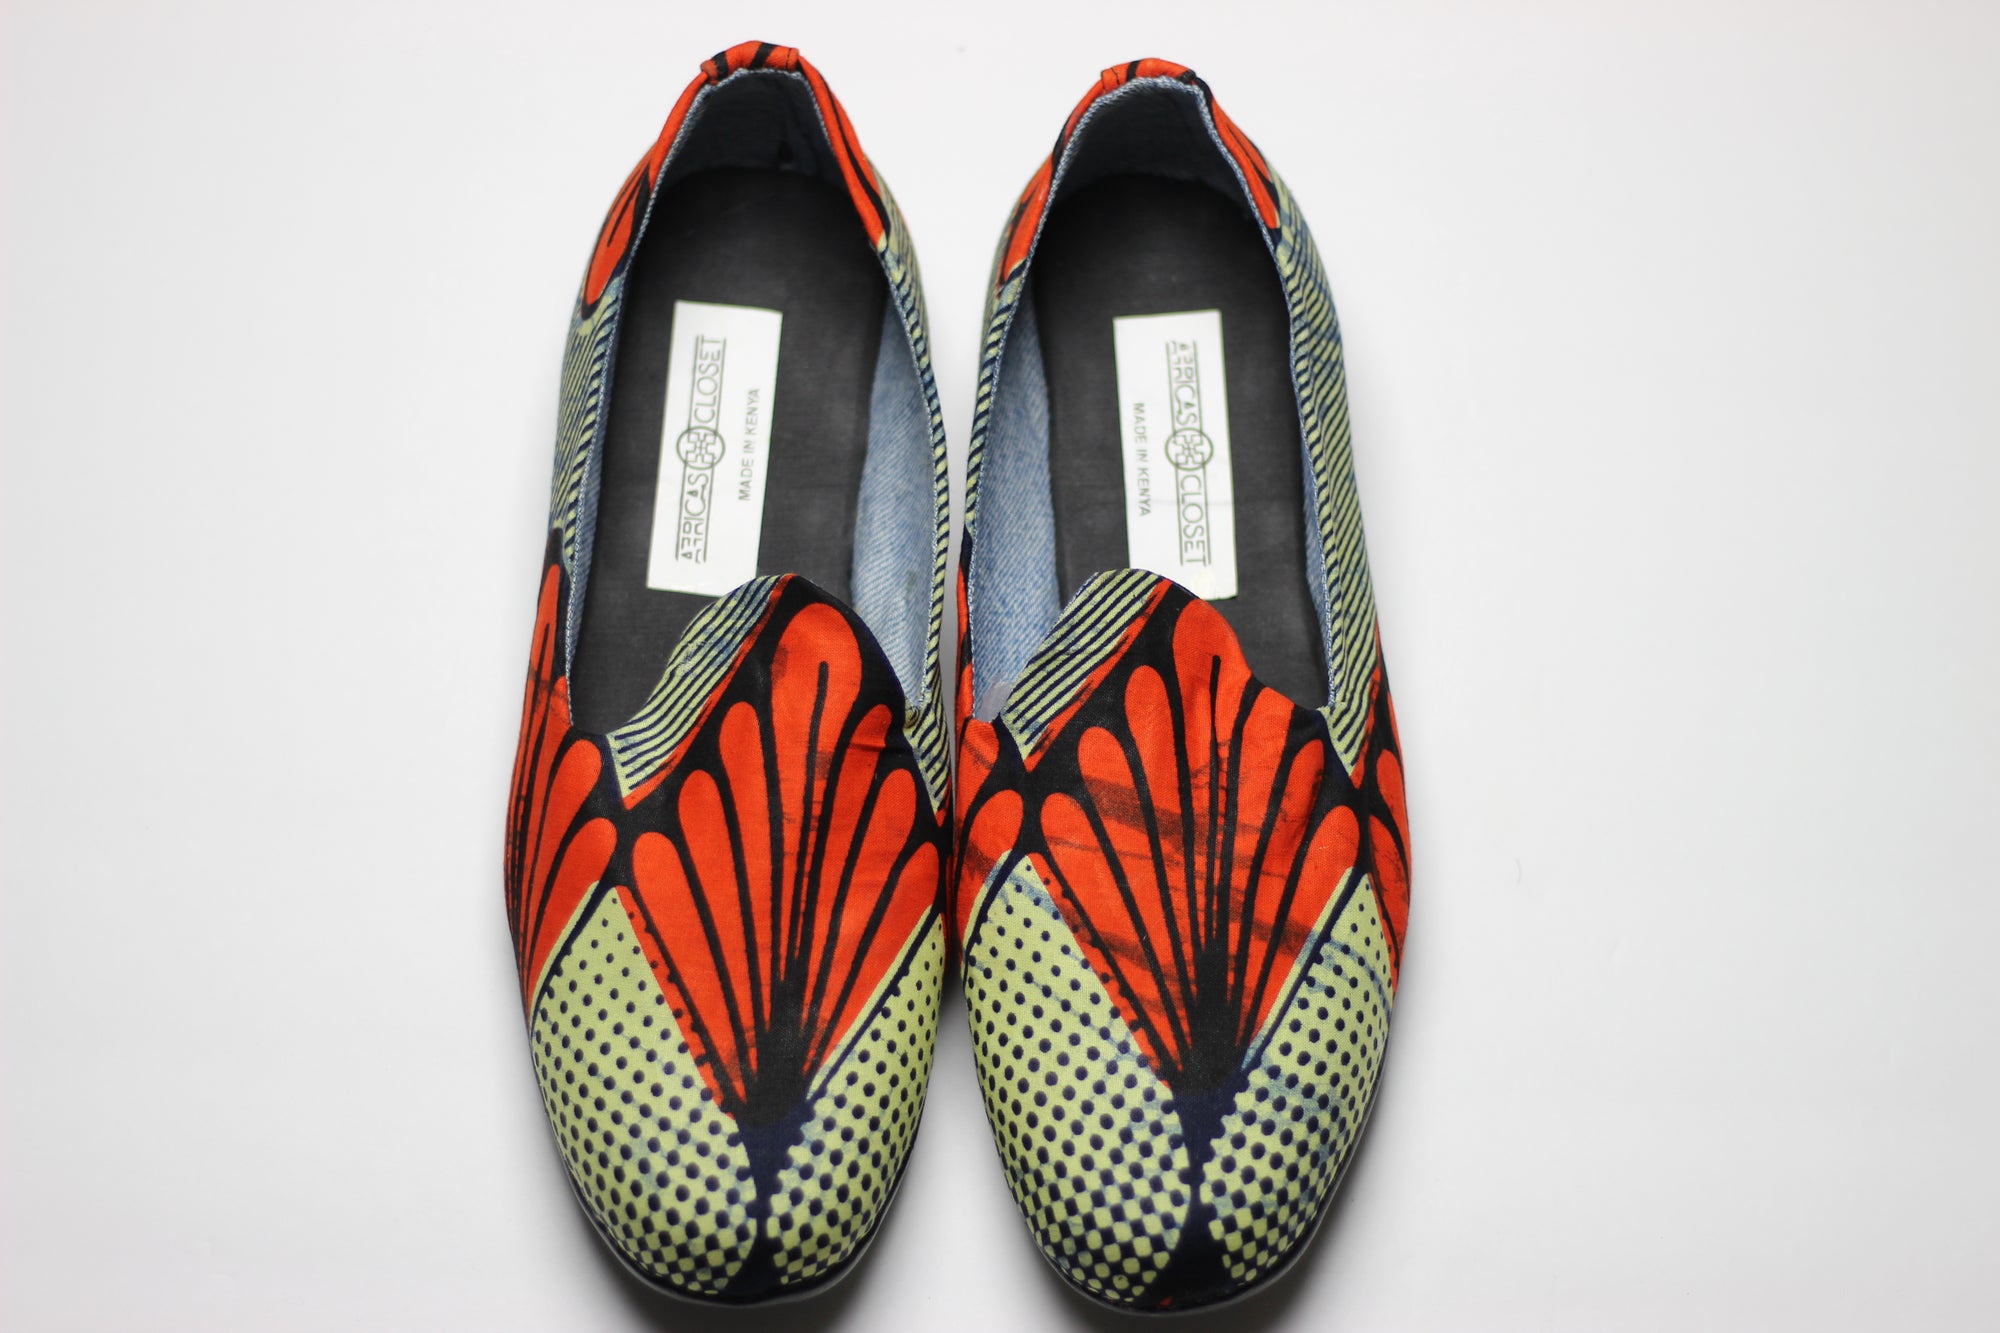 African Print /Ankara Flat Shoes /Loafers(slip ons) - Red and Navy Blue Floral Print. - Africas Closet